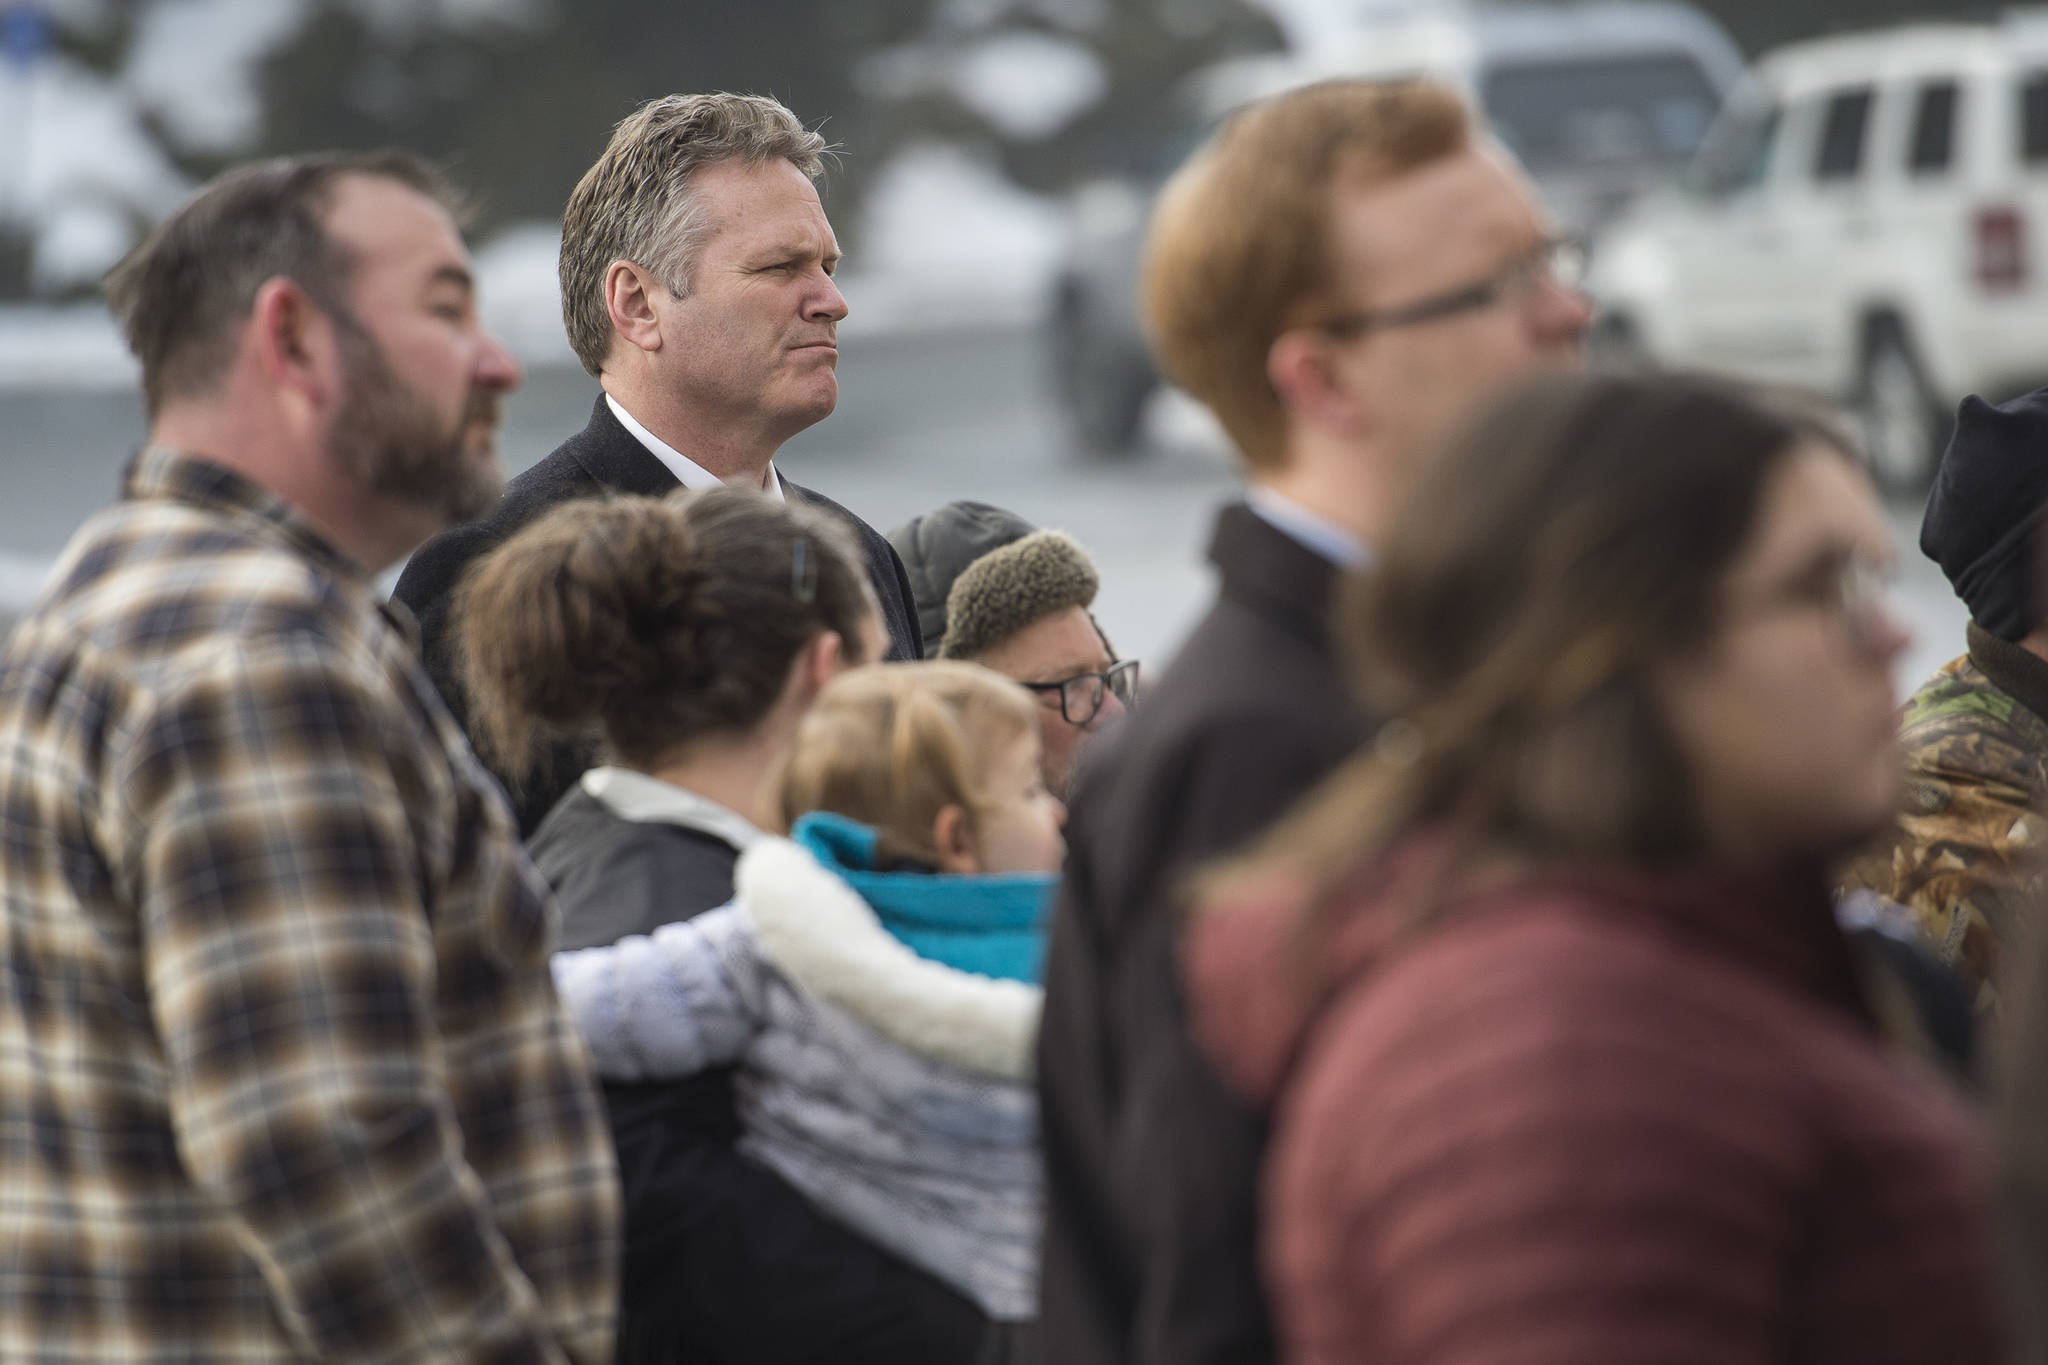 Gov. Mike Dunleavy attends the Alaskans for Life, Inc. annual Rally for Life in front of the Capitol on Tuesday, Jan. 22, 2019. (Michael Penn | Juneau Empire)